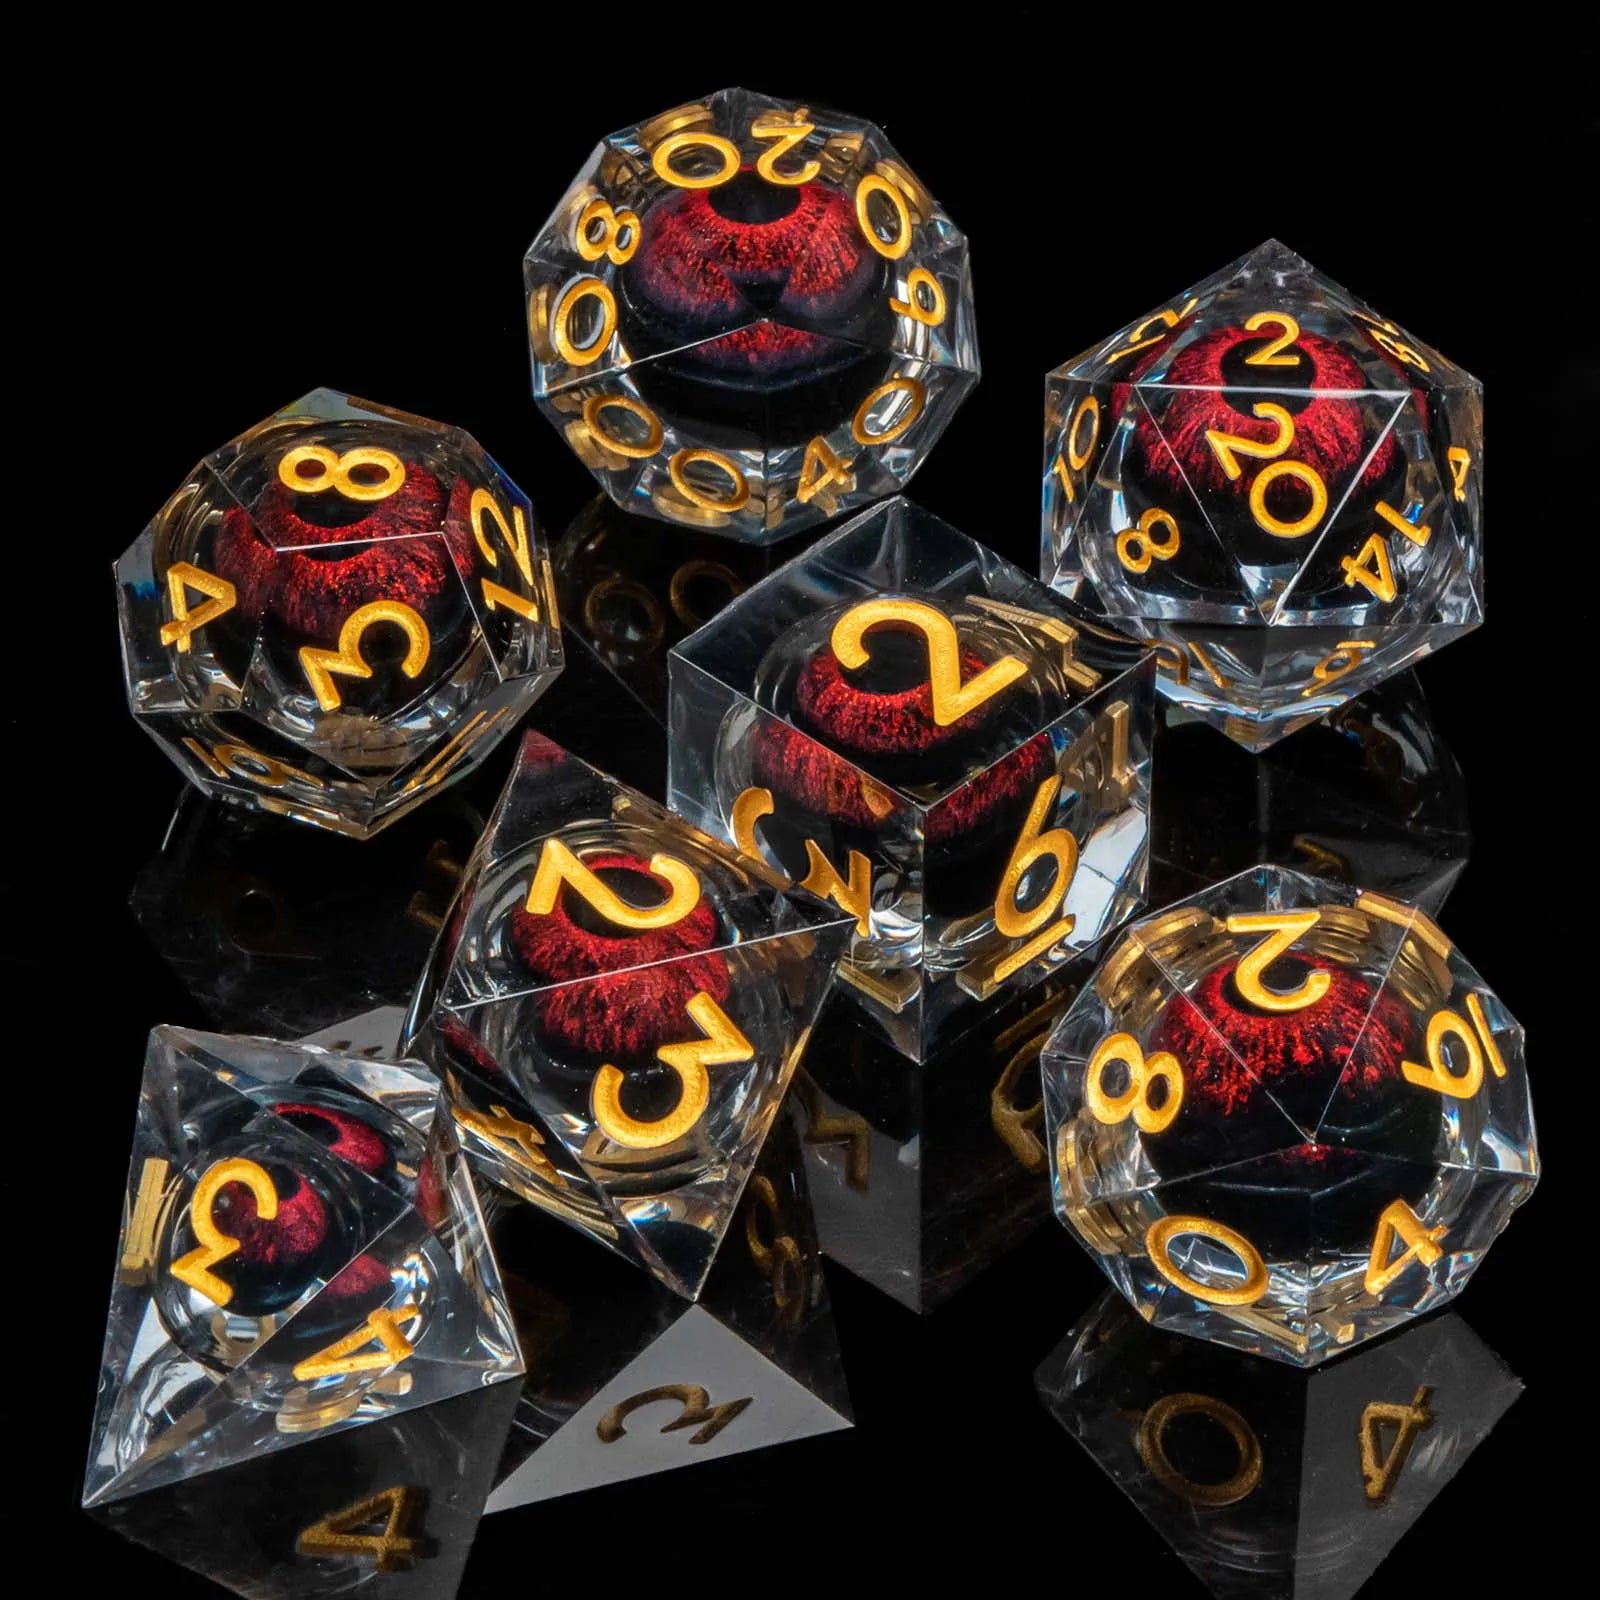 D and D Flowing Sand Sharp Edge Dragon Eye Dnd Resin RPG Polyhedral D&D Dice Set For Dungeon and Dragon Pathfinder Role Playing AZ02